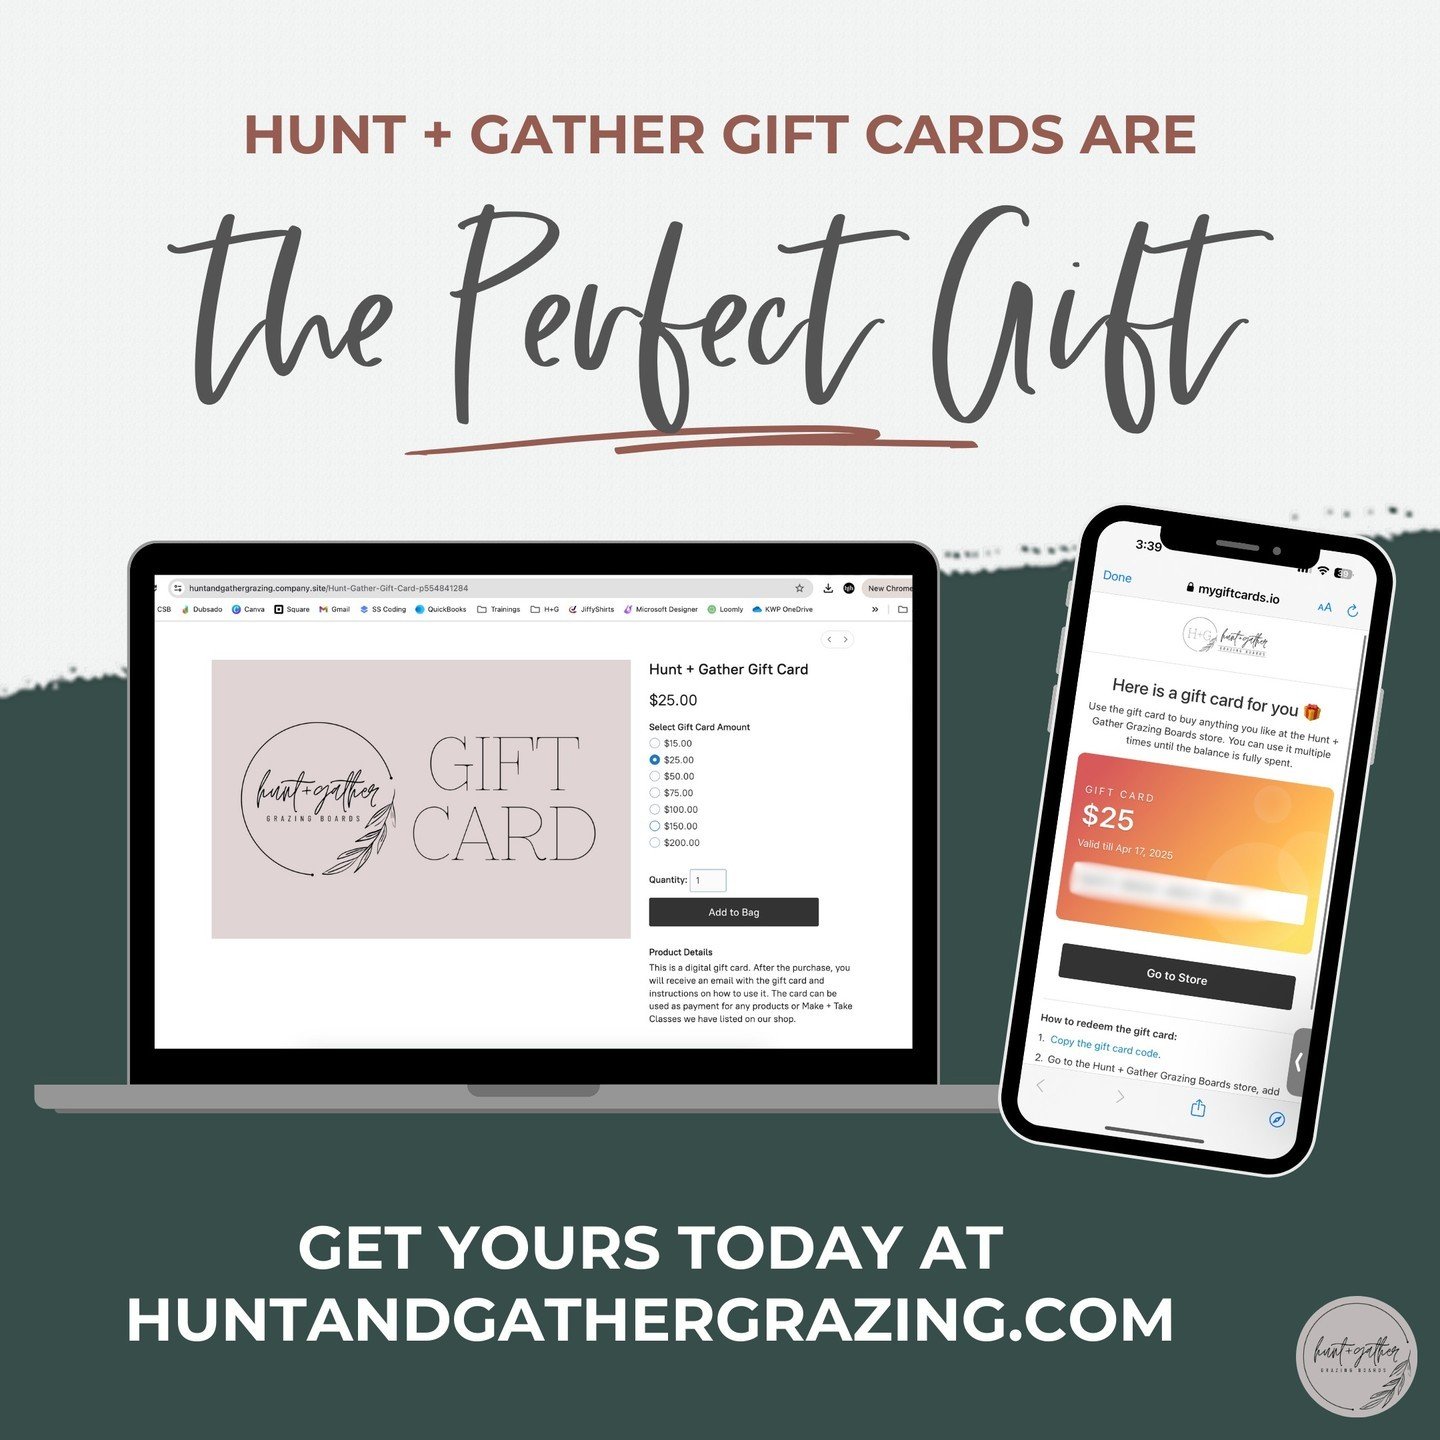 Our gift cards are the ✨ perfect gift ✨ for any occasion - Order yours today at our link in bio!

#HuntAndGatherGrazing #PerfectGift #Charcuterie